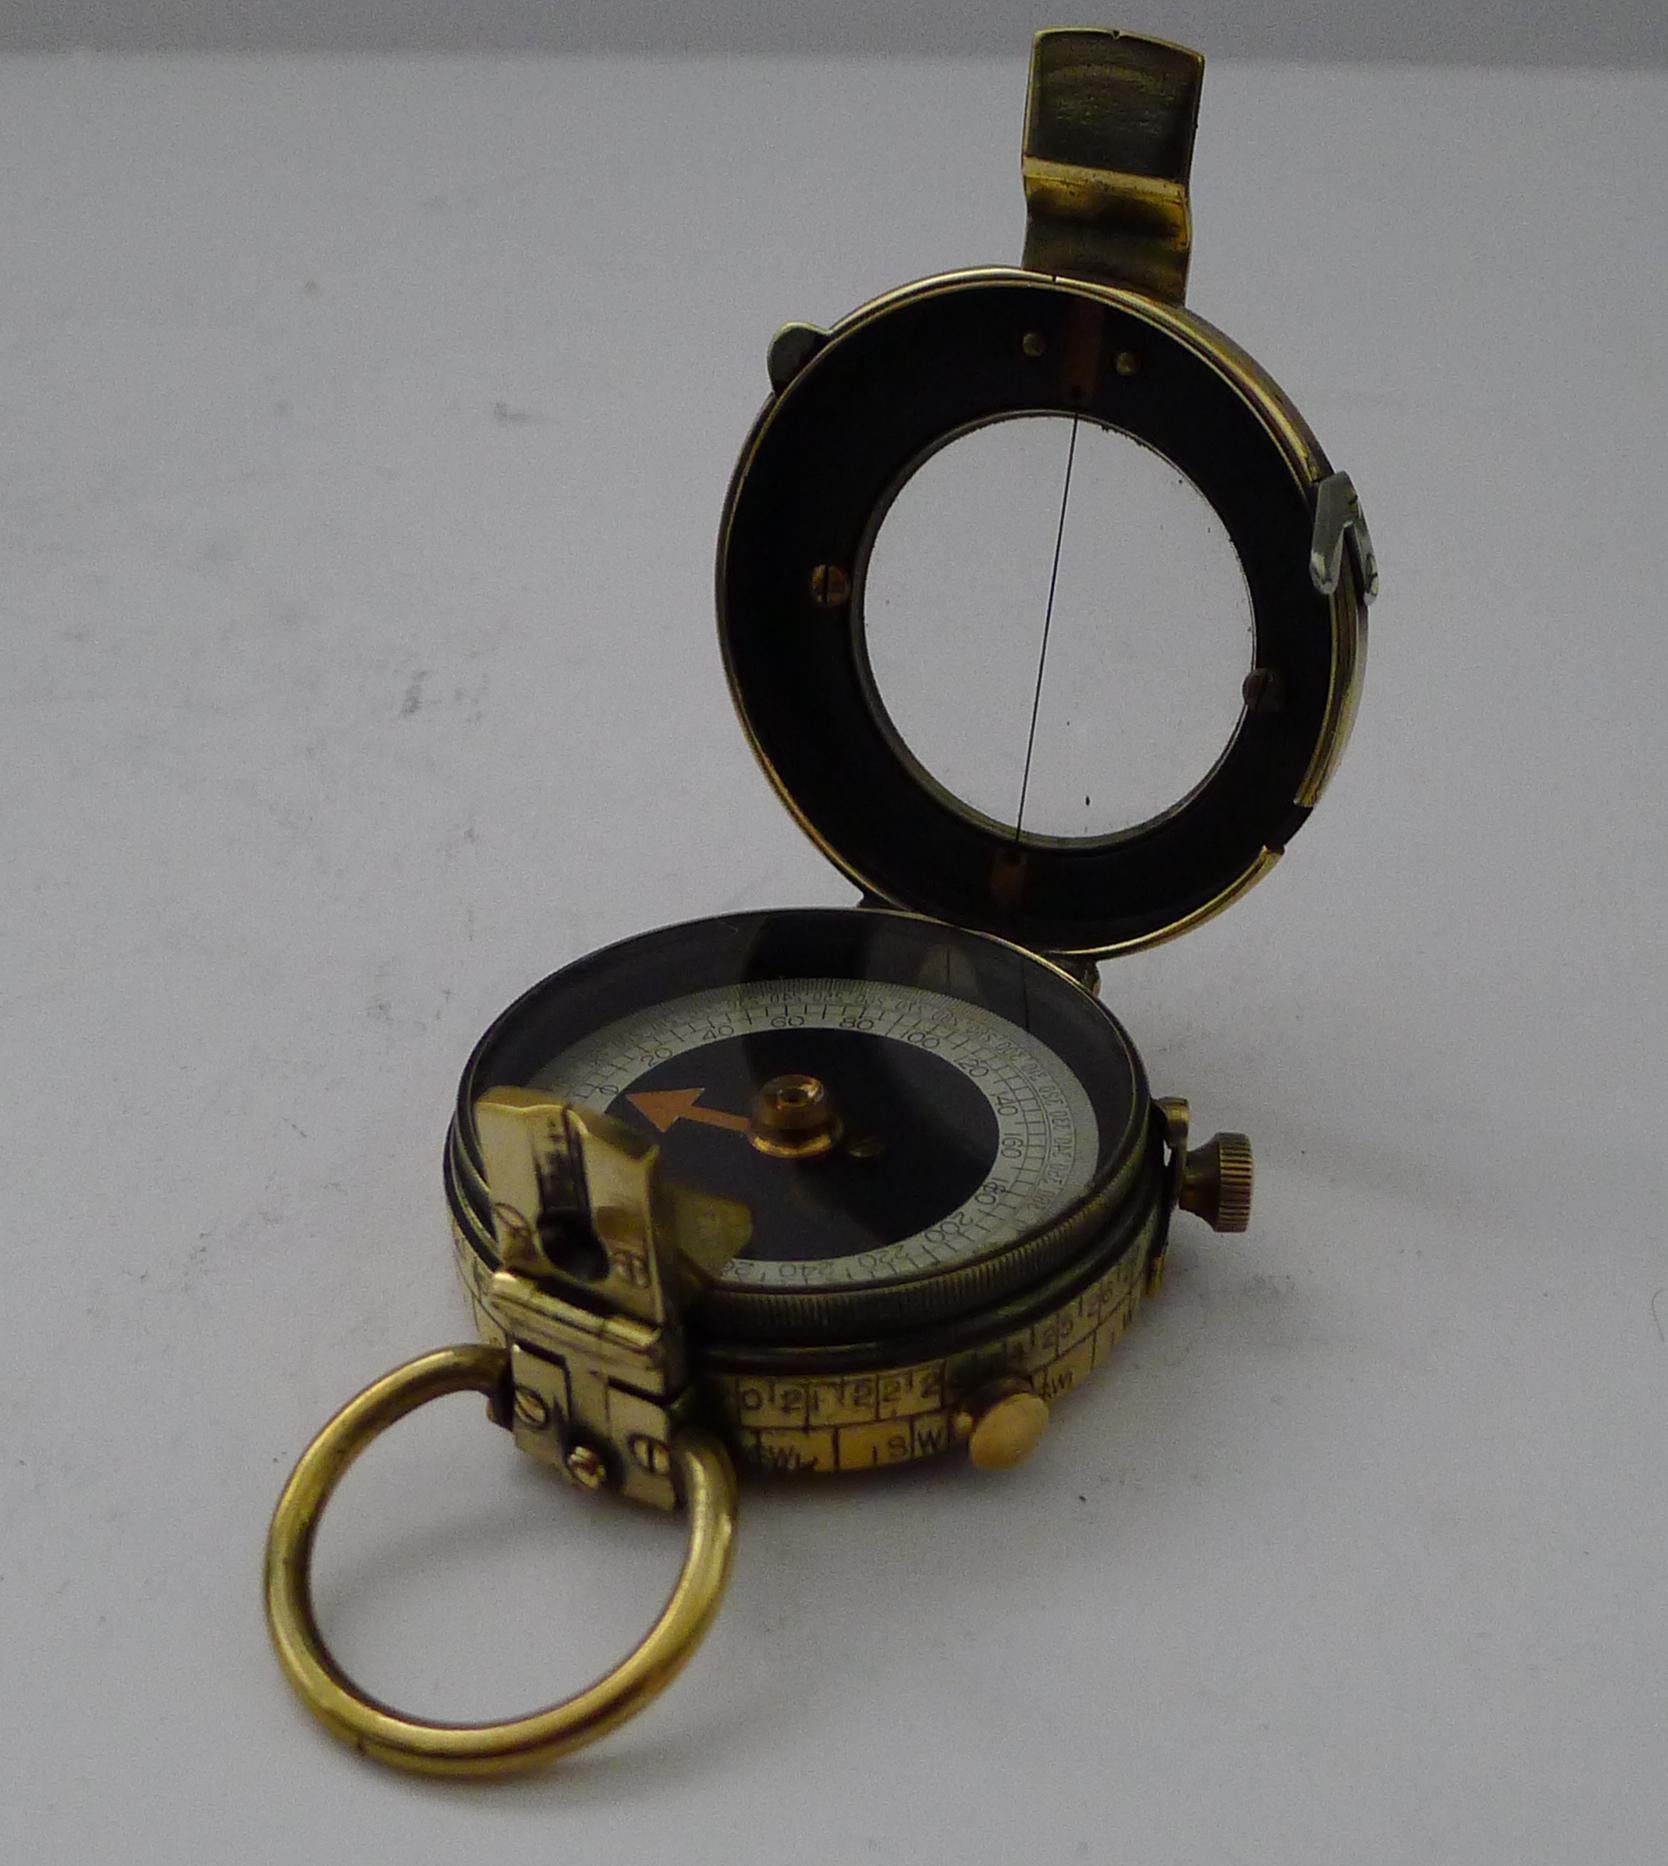 WW1 1918 British Army Officer's Compass - Verner's Patent MK VII by French Ltd. For Sale 6